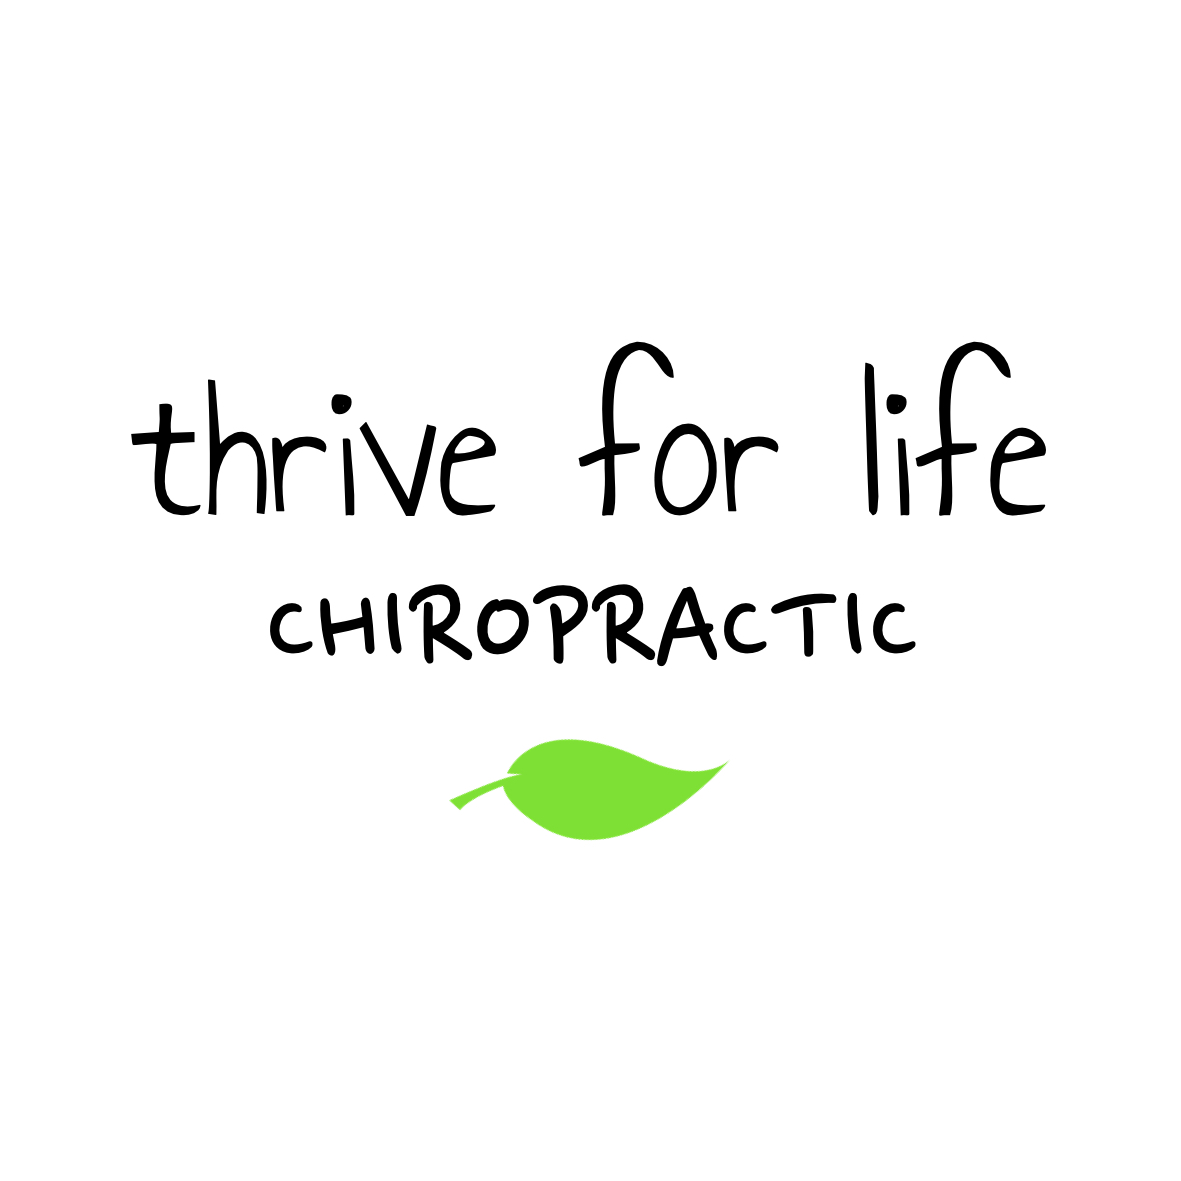 Thrive for Life Chiropractic logo